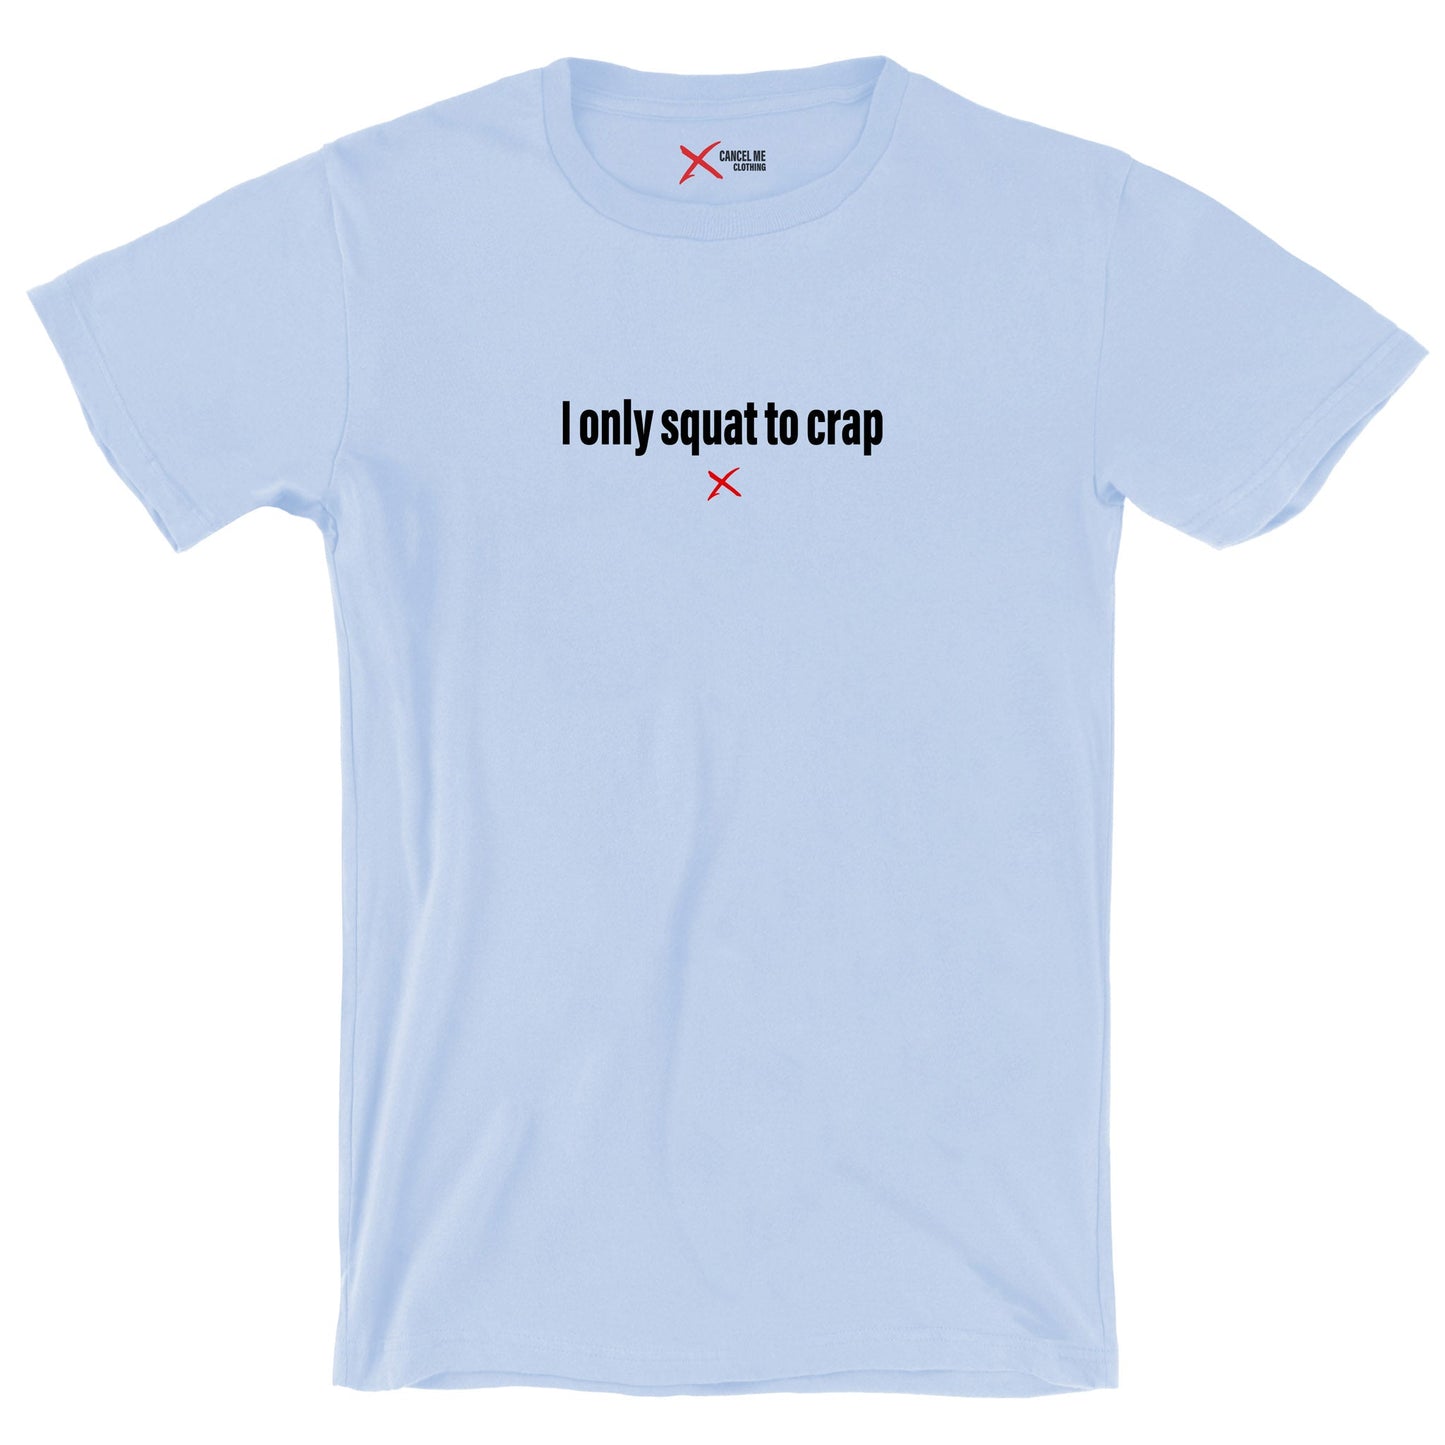 I only squat to crap - Shirt